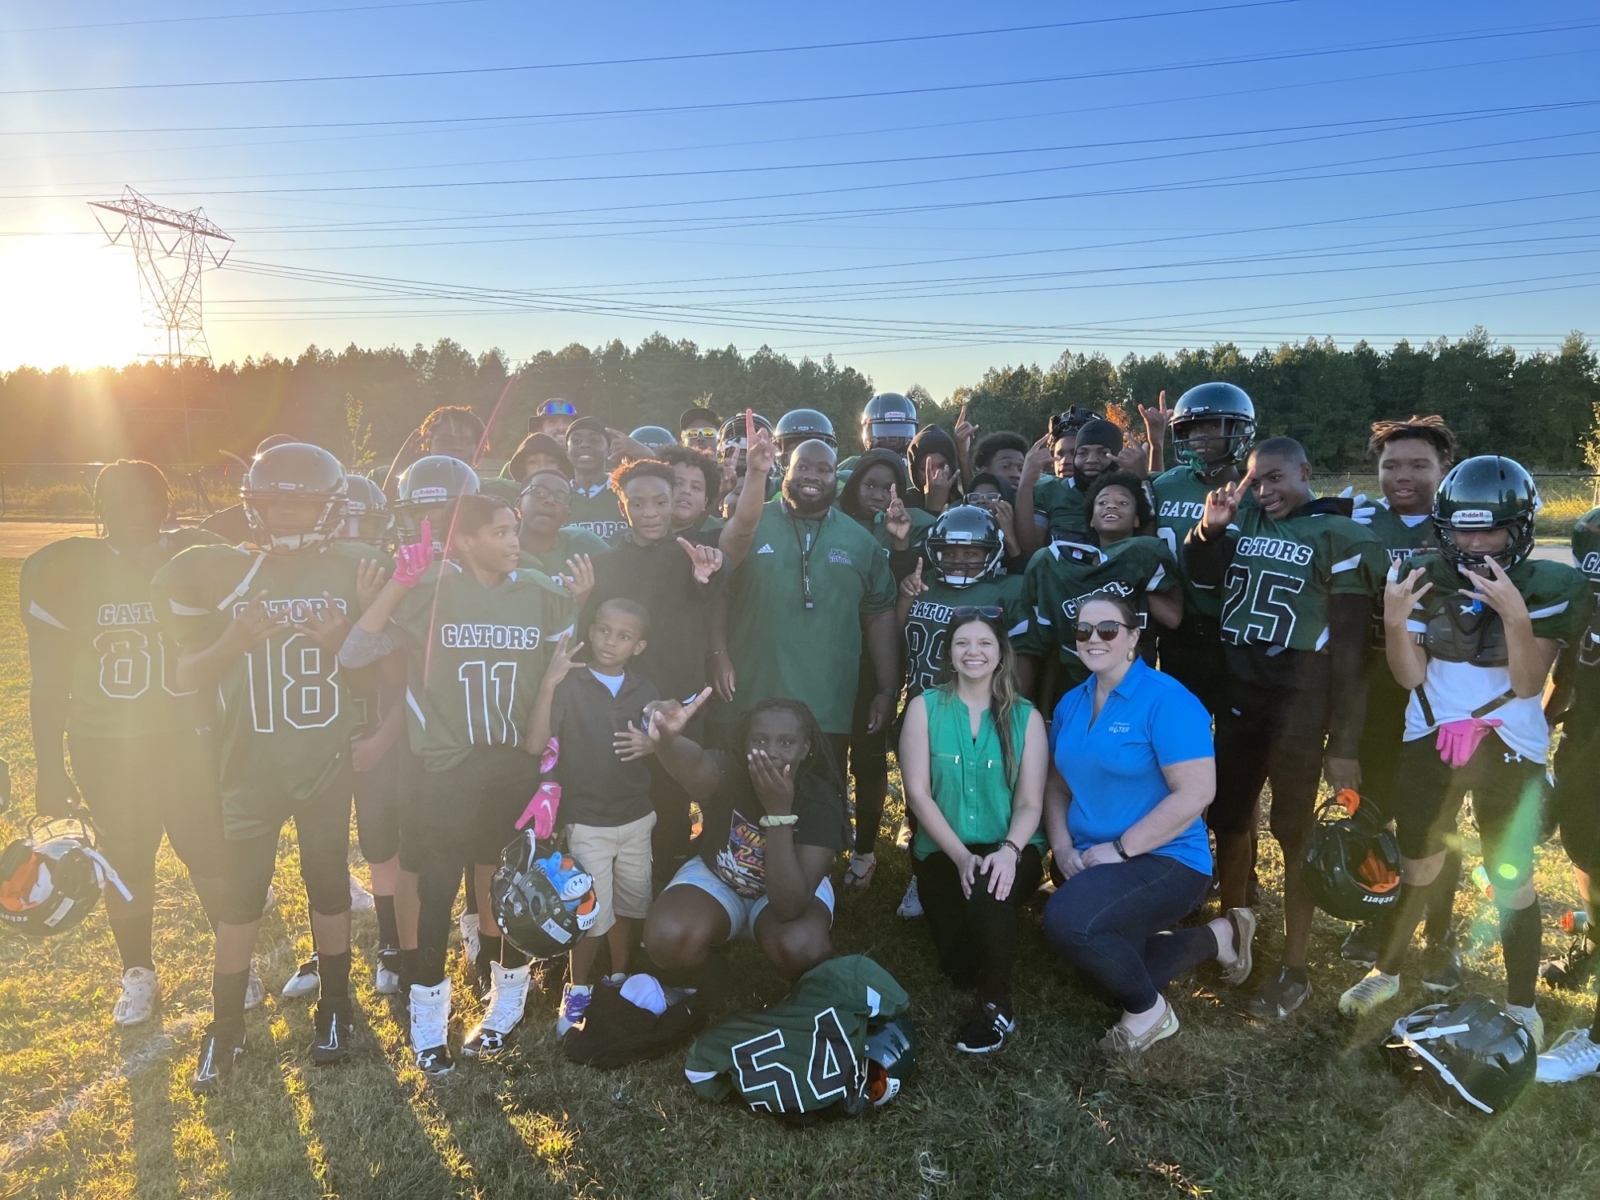 The Whitewater Middle School Football Team celebrate their win with Charlotte Water Project Manager Nicole Bartlett and Stowe Communications Manager Krystal Harwick